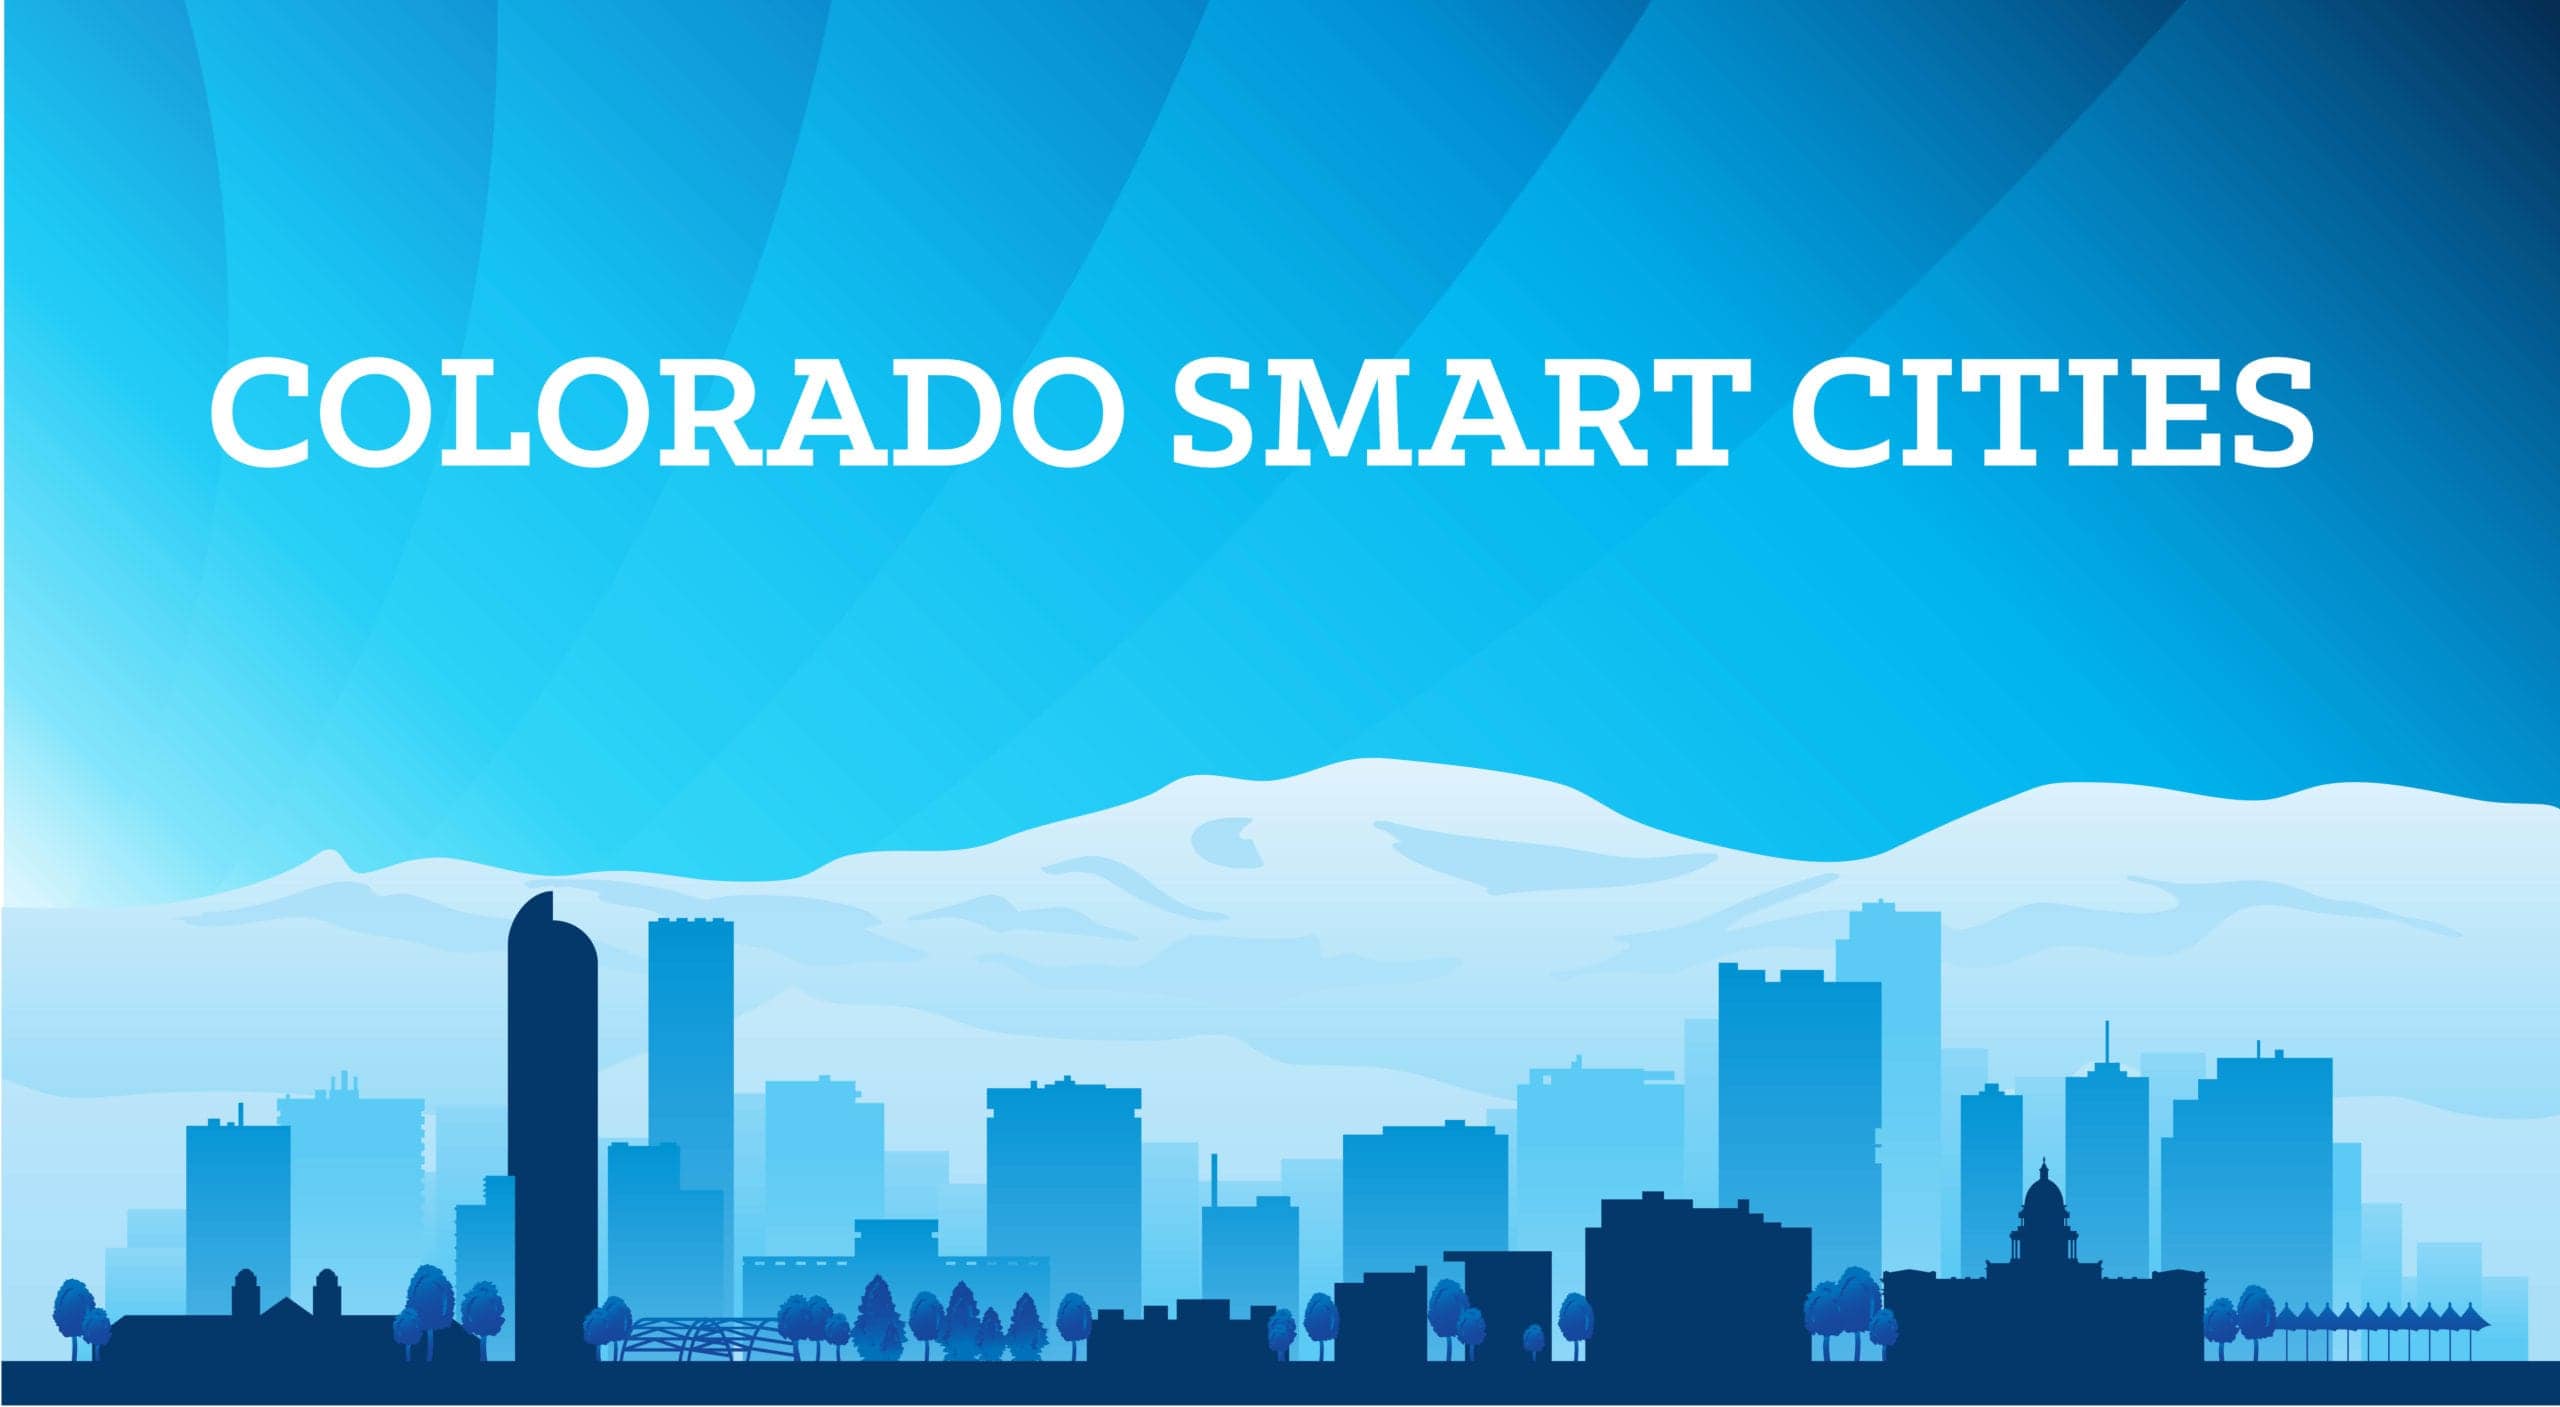 Launching a statewide alliance on Smart Cities Denver South